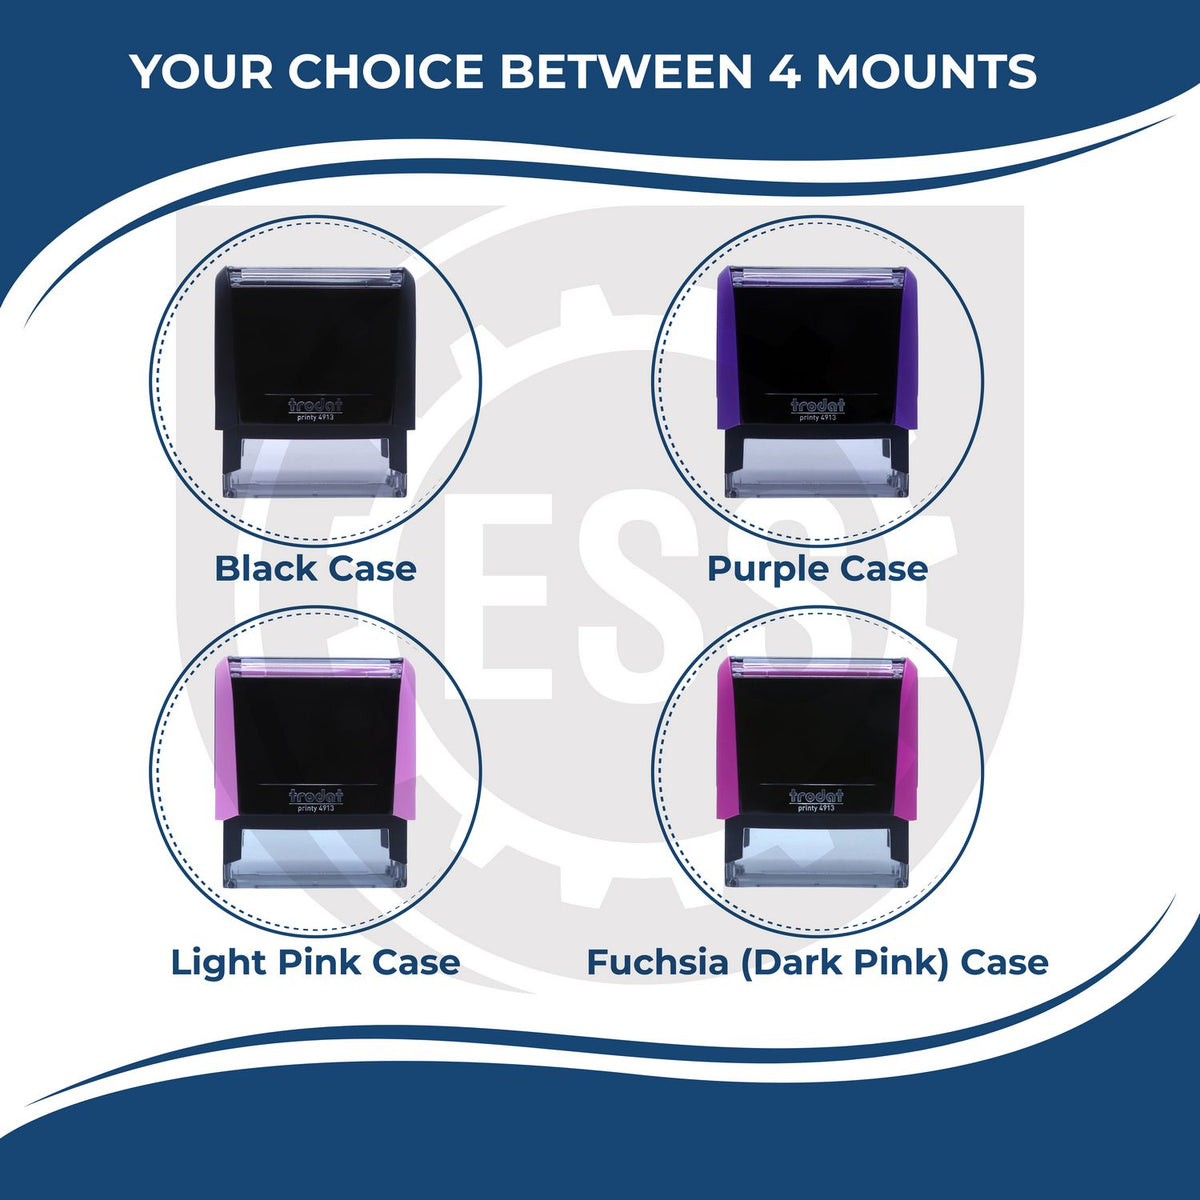 A picture of different colored mounts for the Self-Inking State Seal Ohio Notary Stamp featurning a Red, Blue or Black Mount